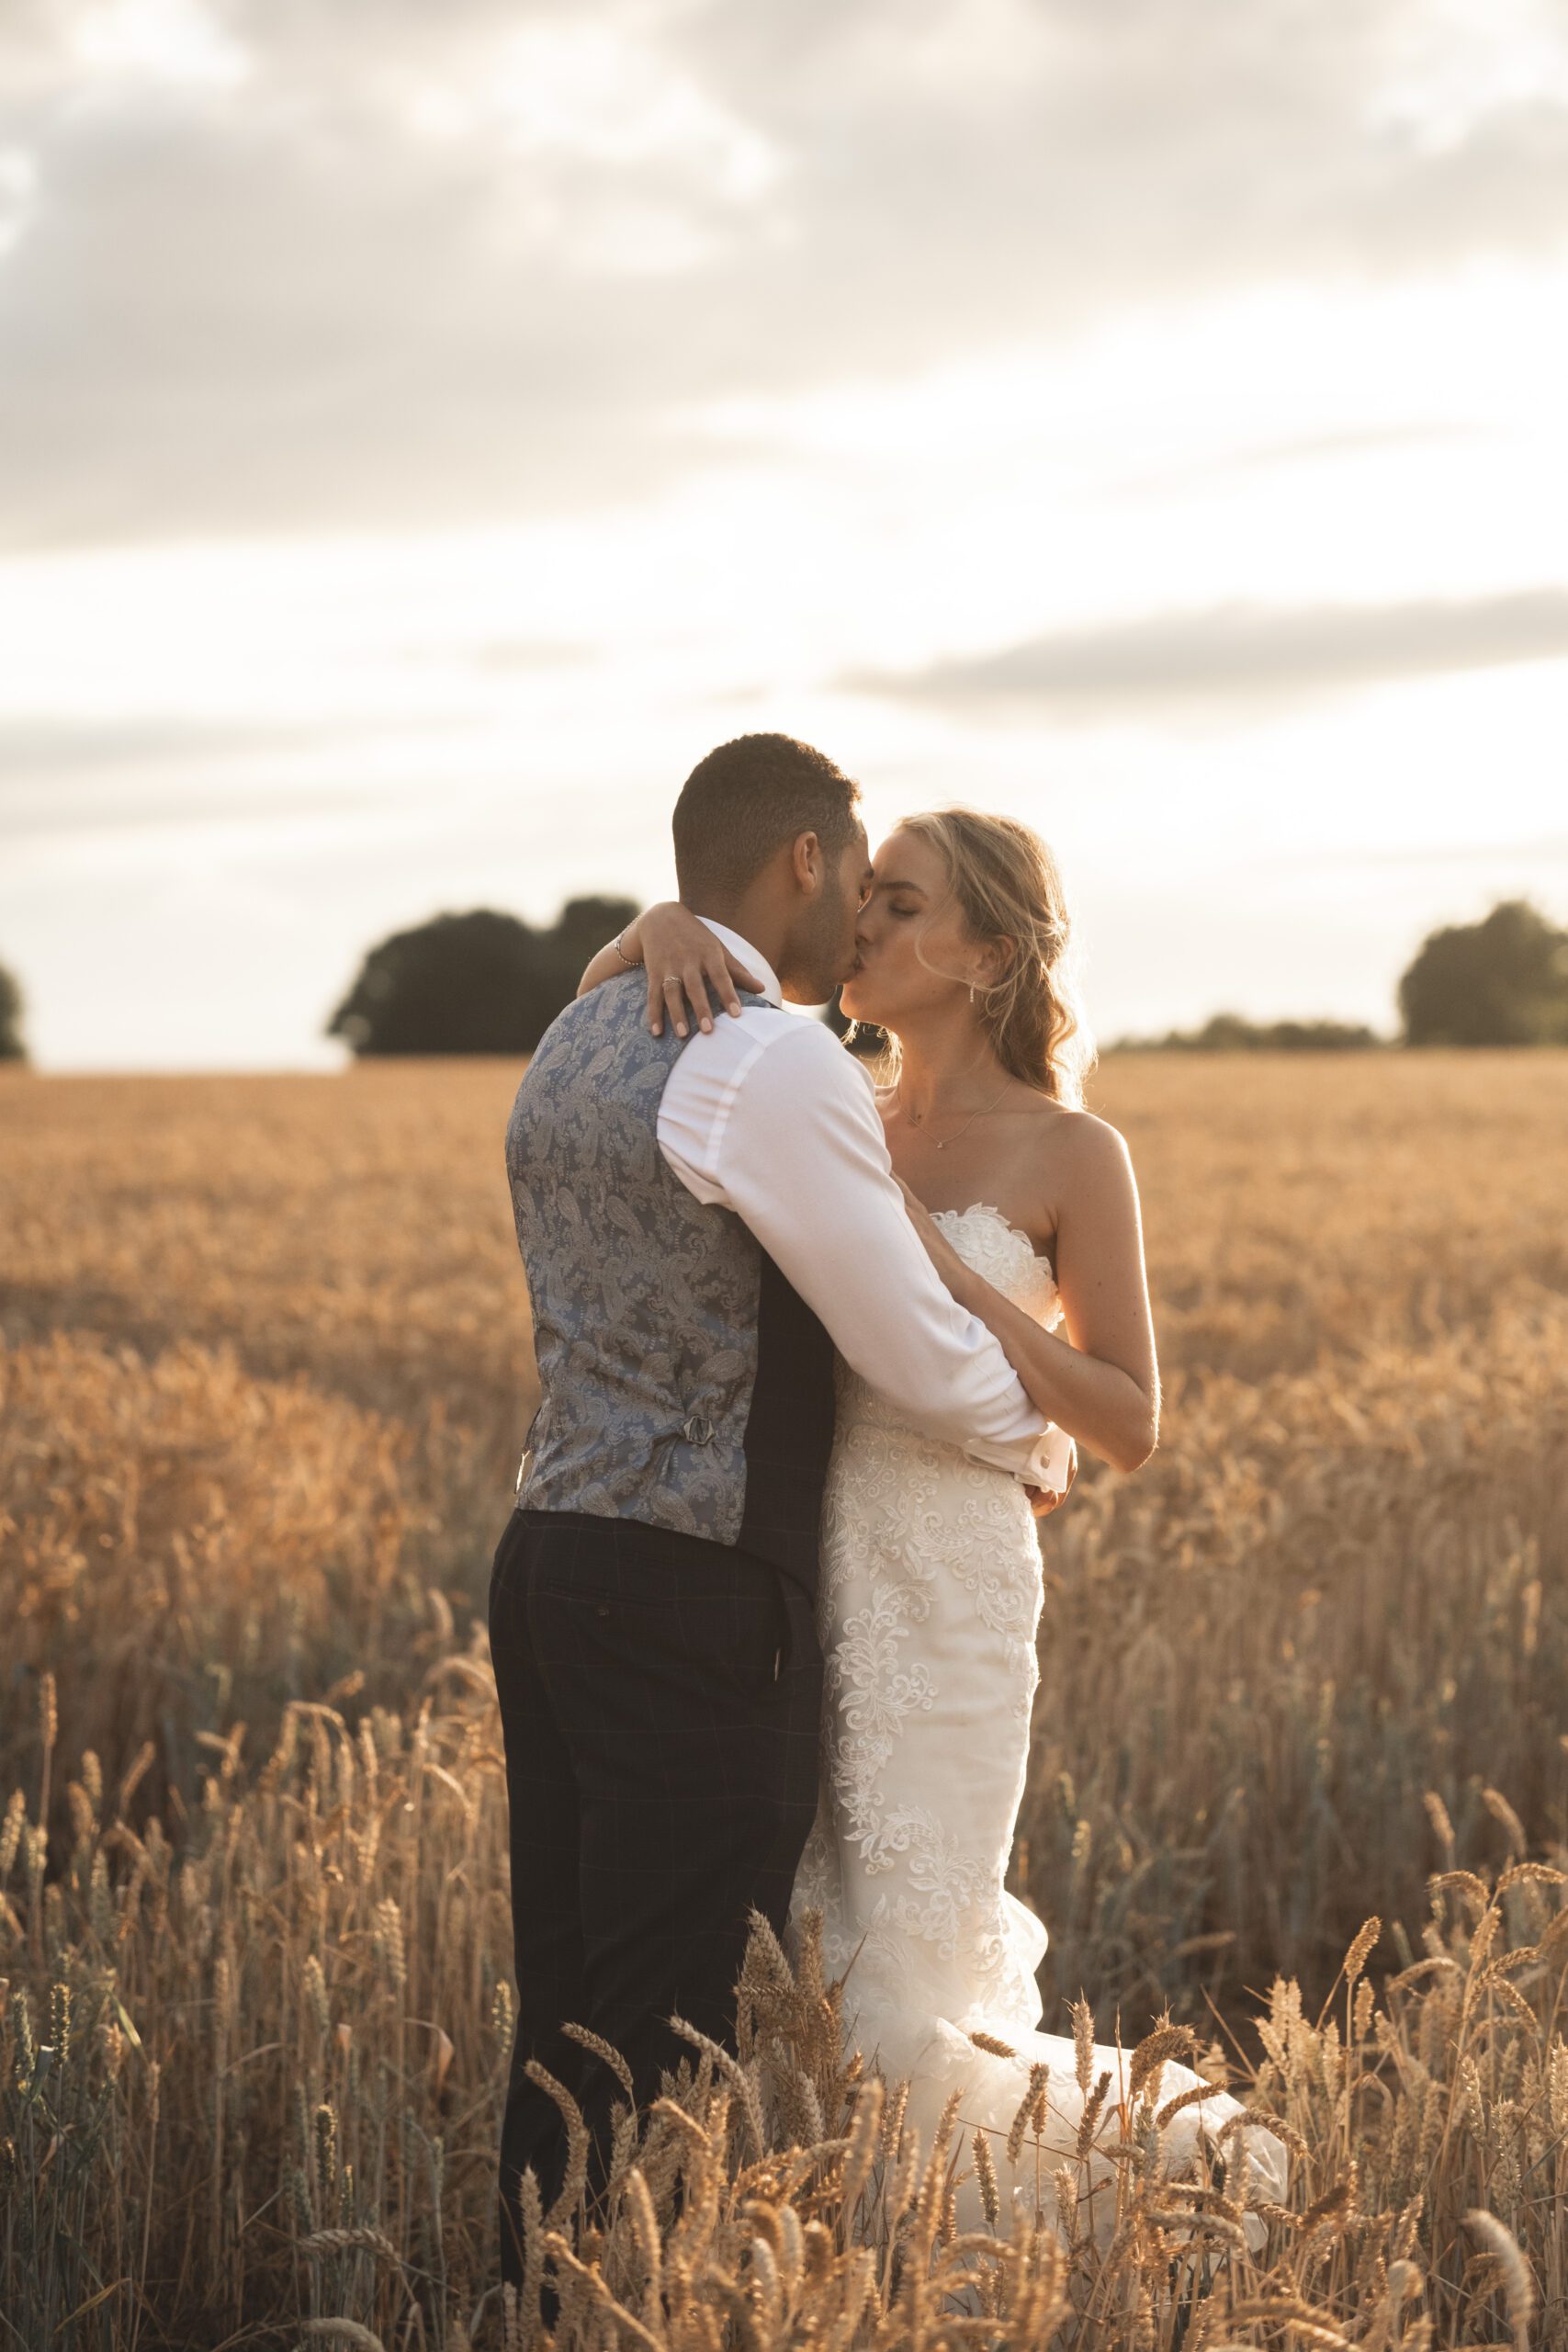 Golden hour couple session at Cripps and Co's Stone Barn, Cotswolds